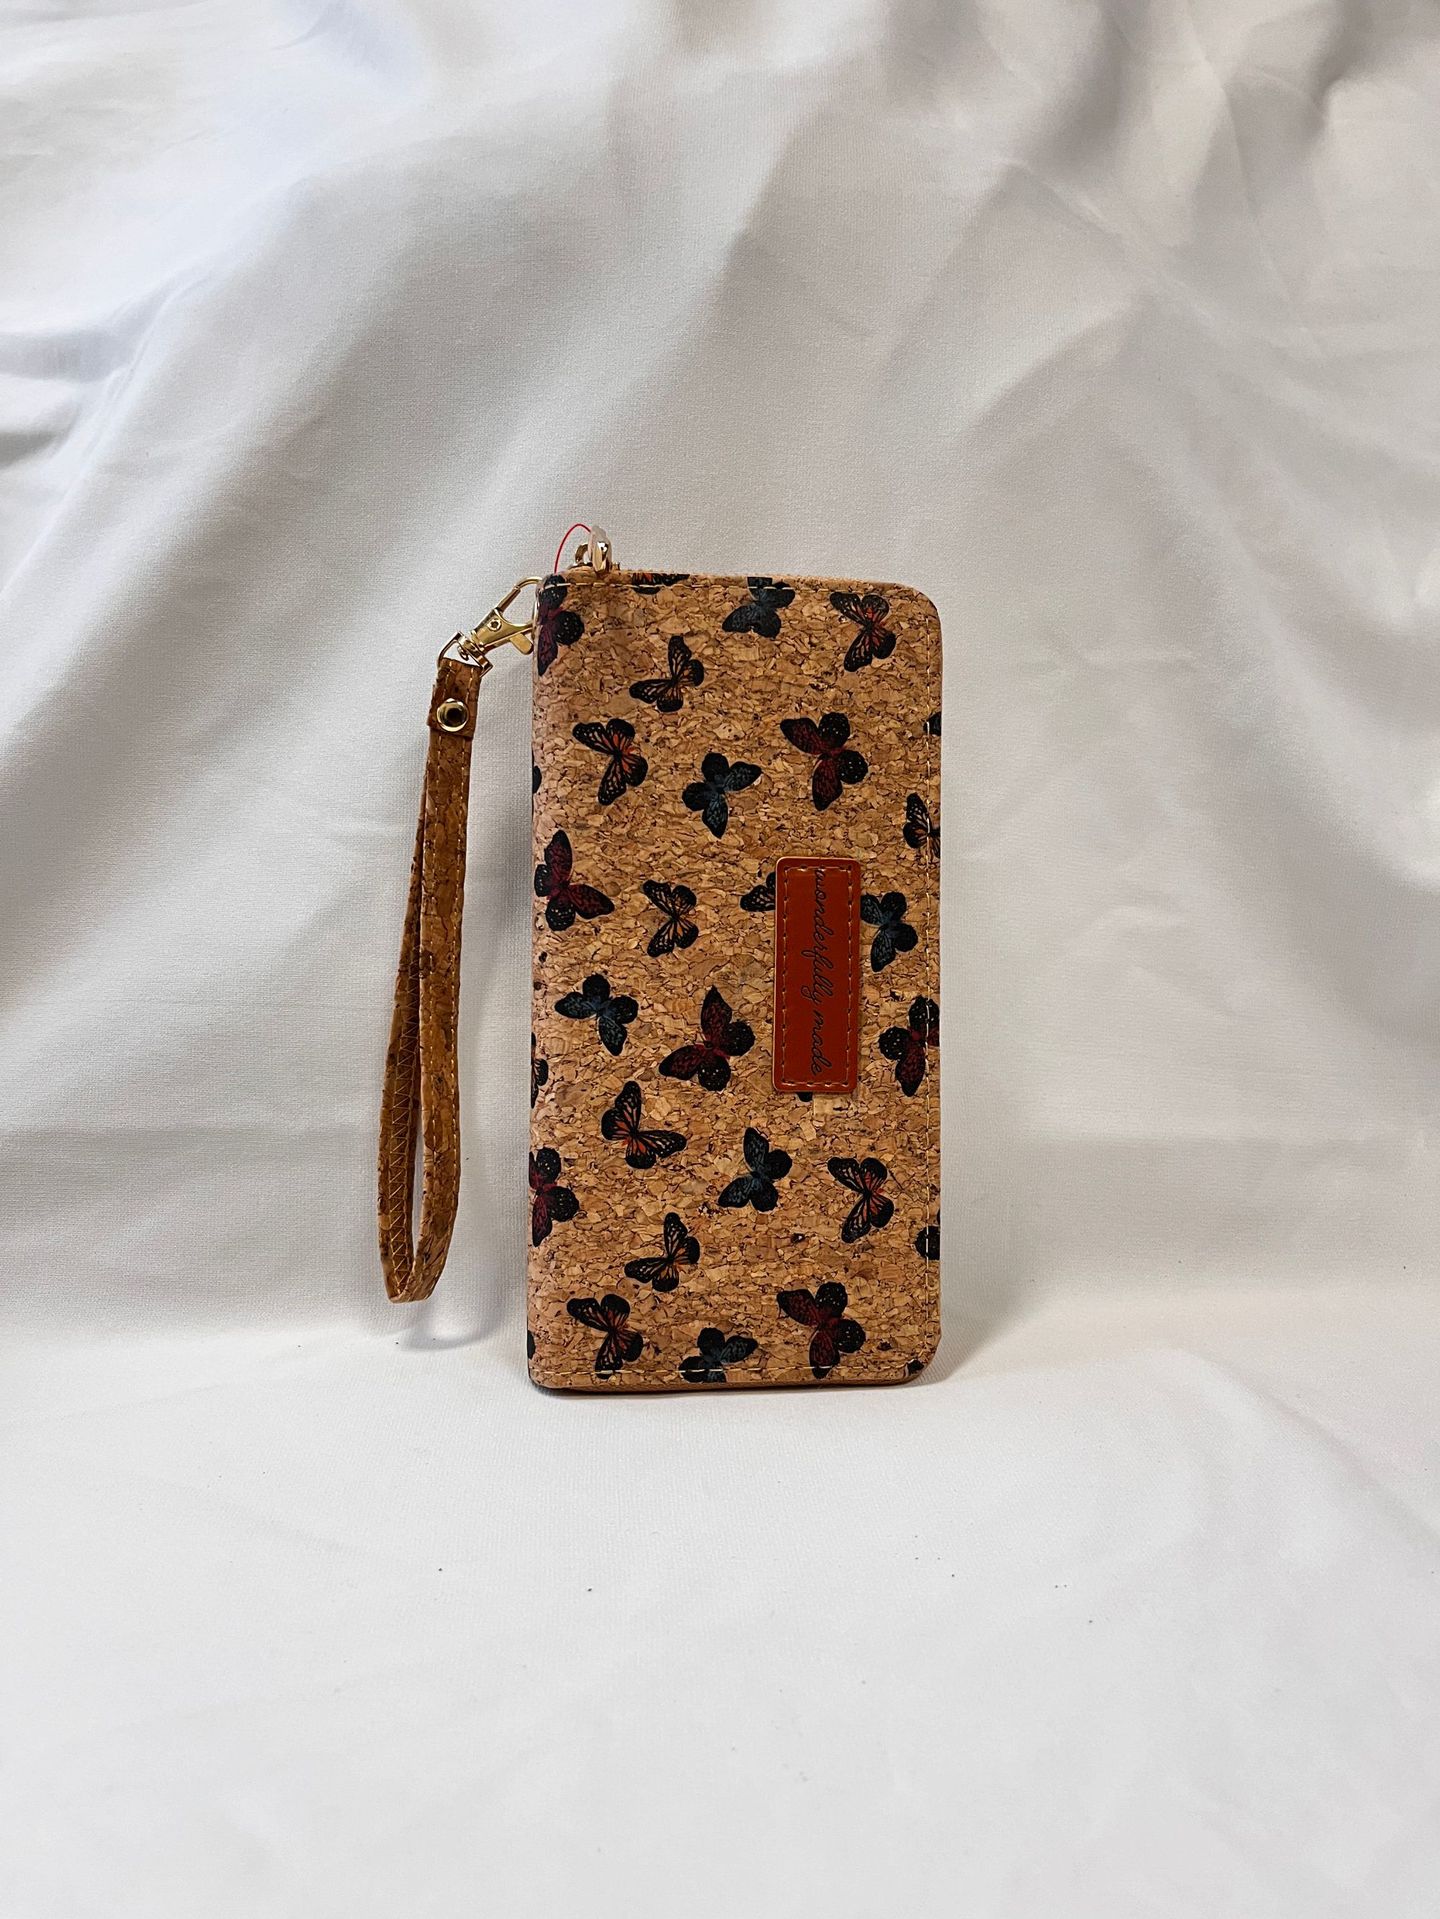 Pu Leather Vintage Printed Coin Purse Simple Fashion Long Multi-Card Card Holder Environmentally Friendly Cork Exquisite European and American Style